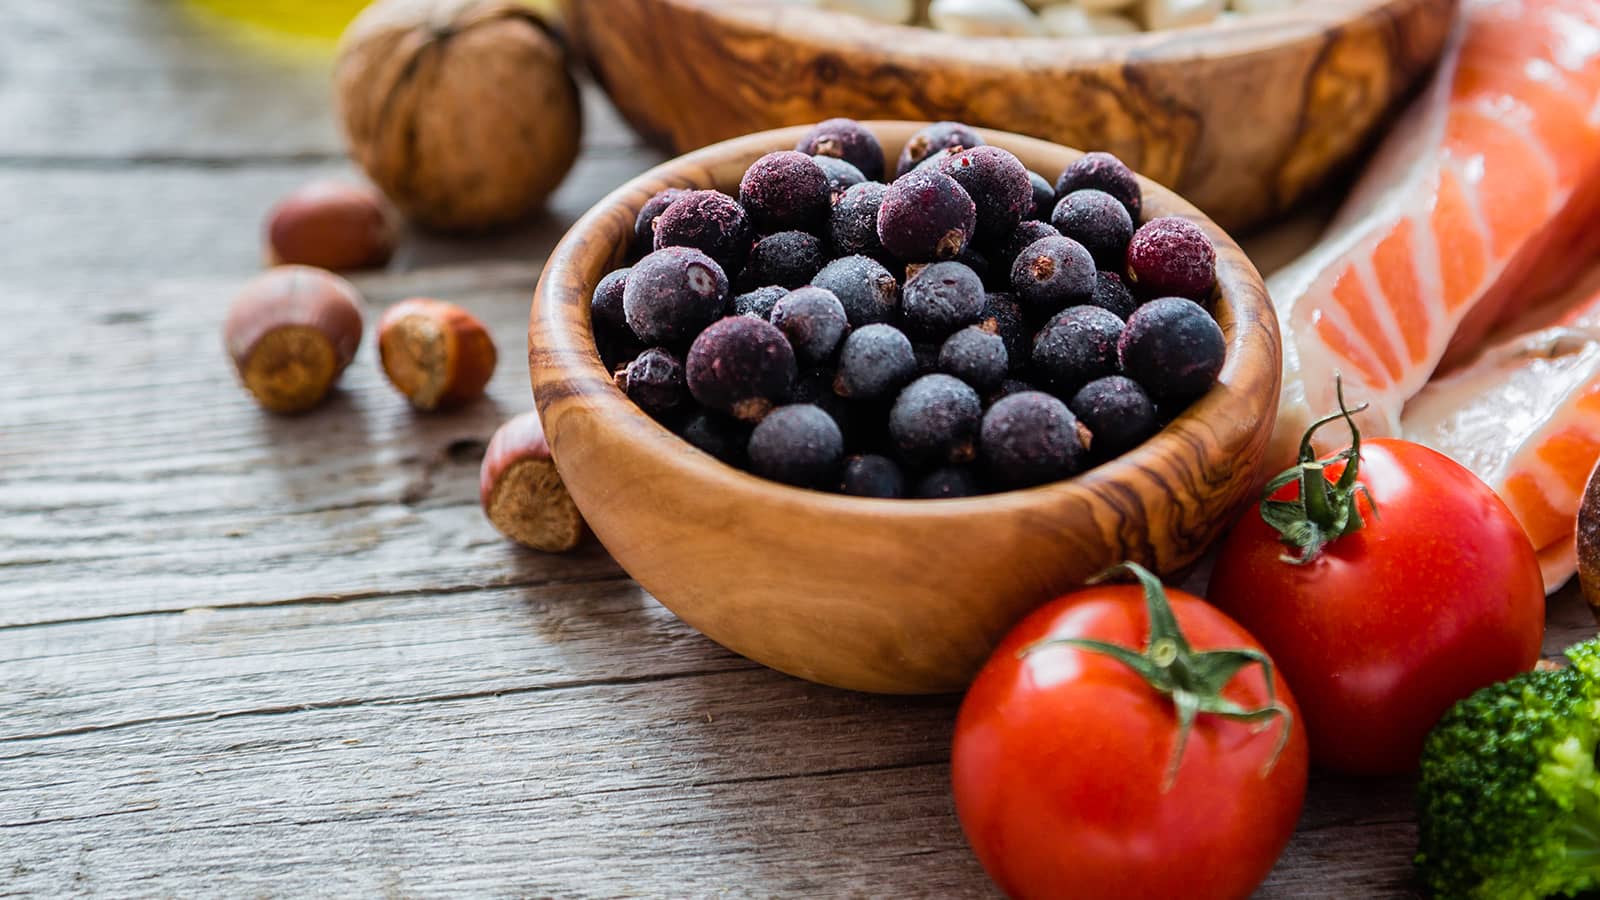 Wooden bowl of blueberries with arrangement of other healthy food - tomatoes